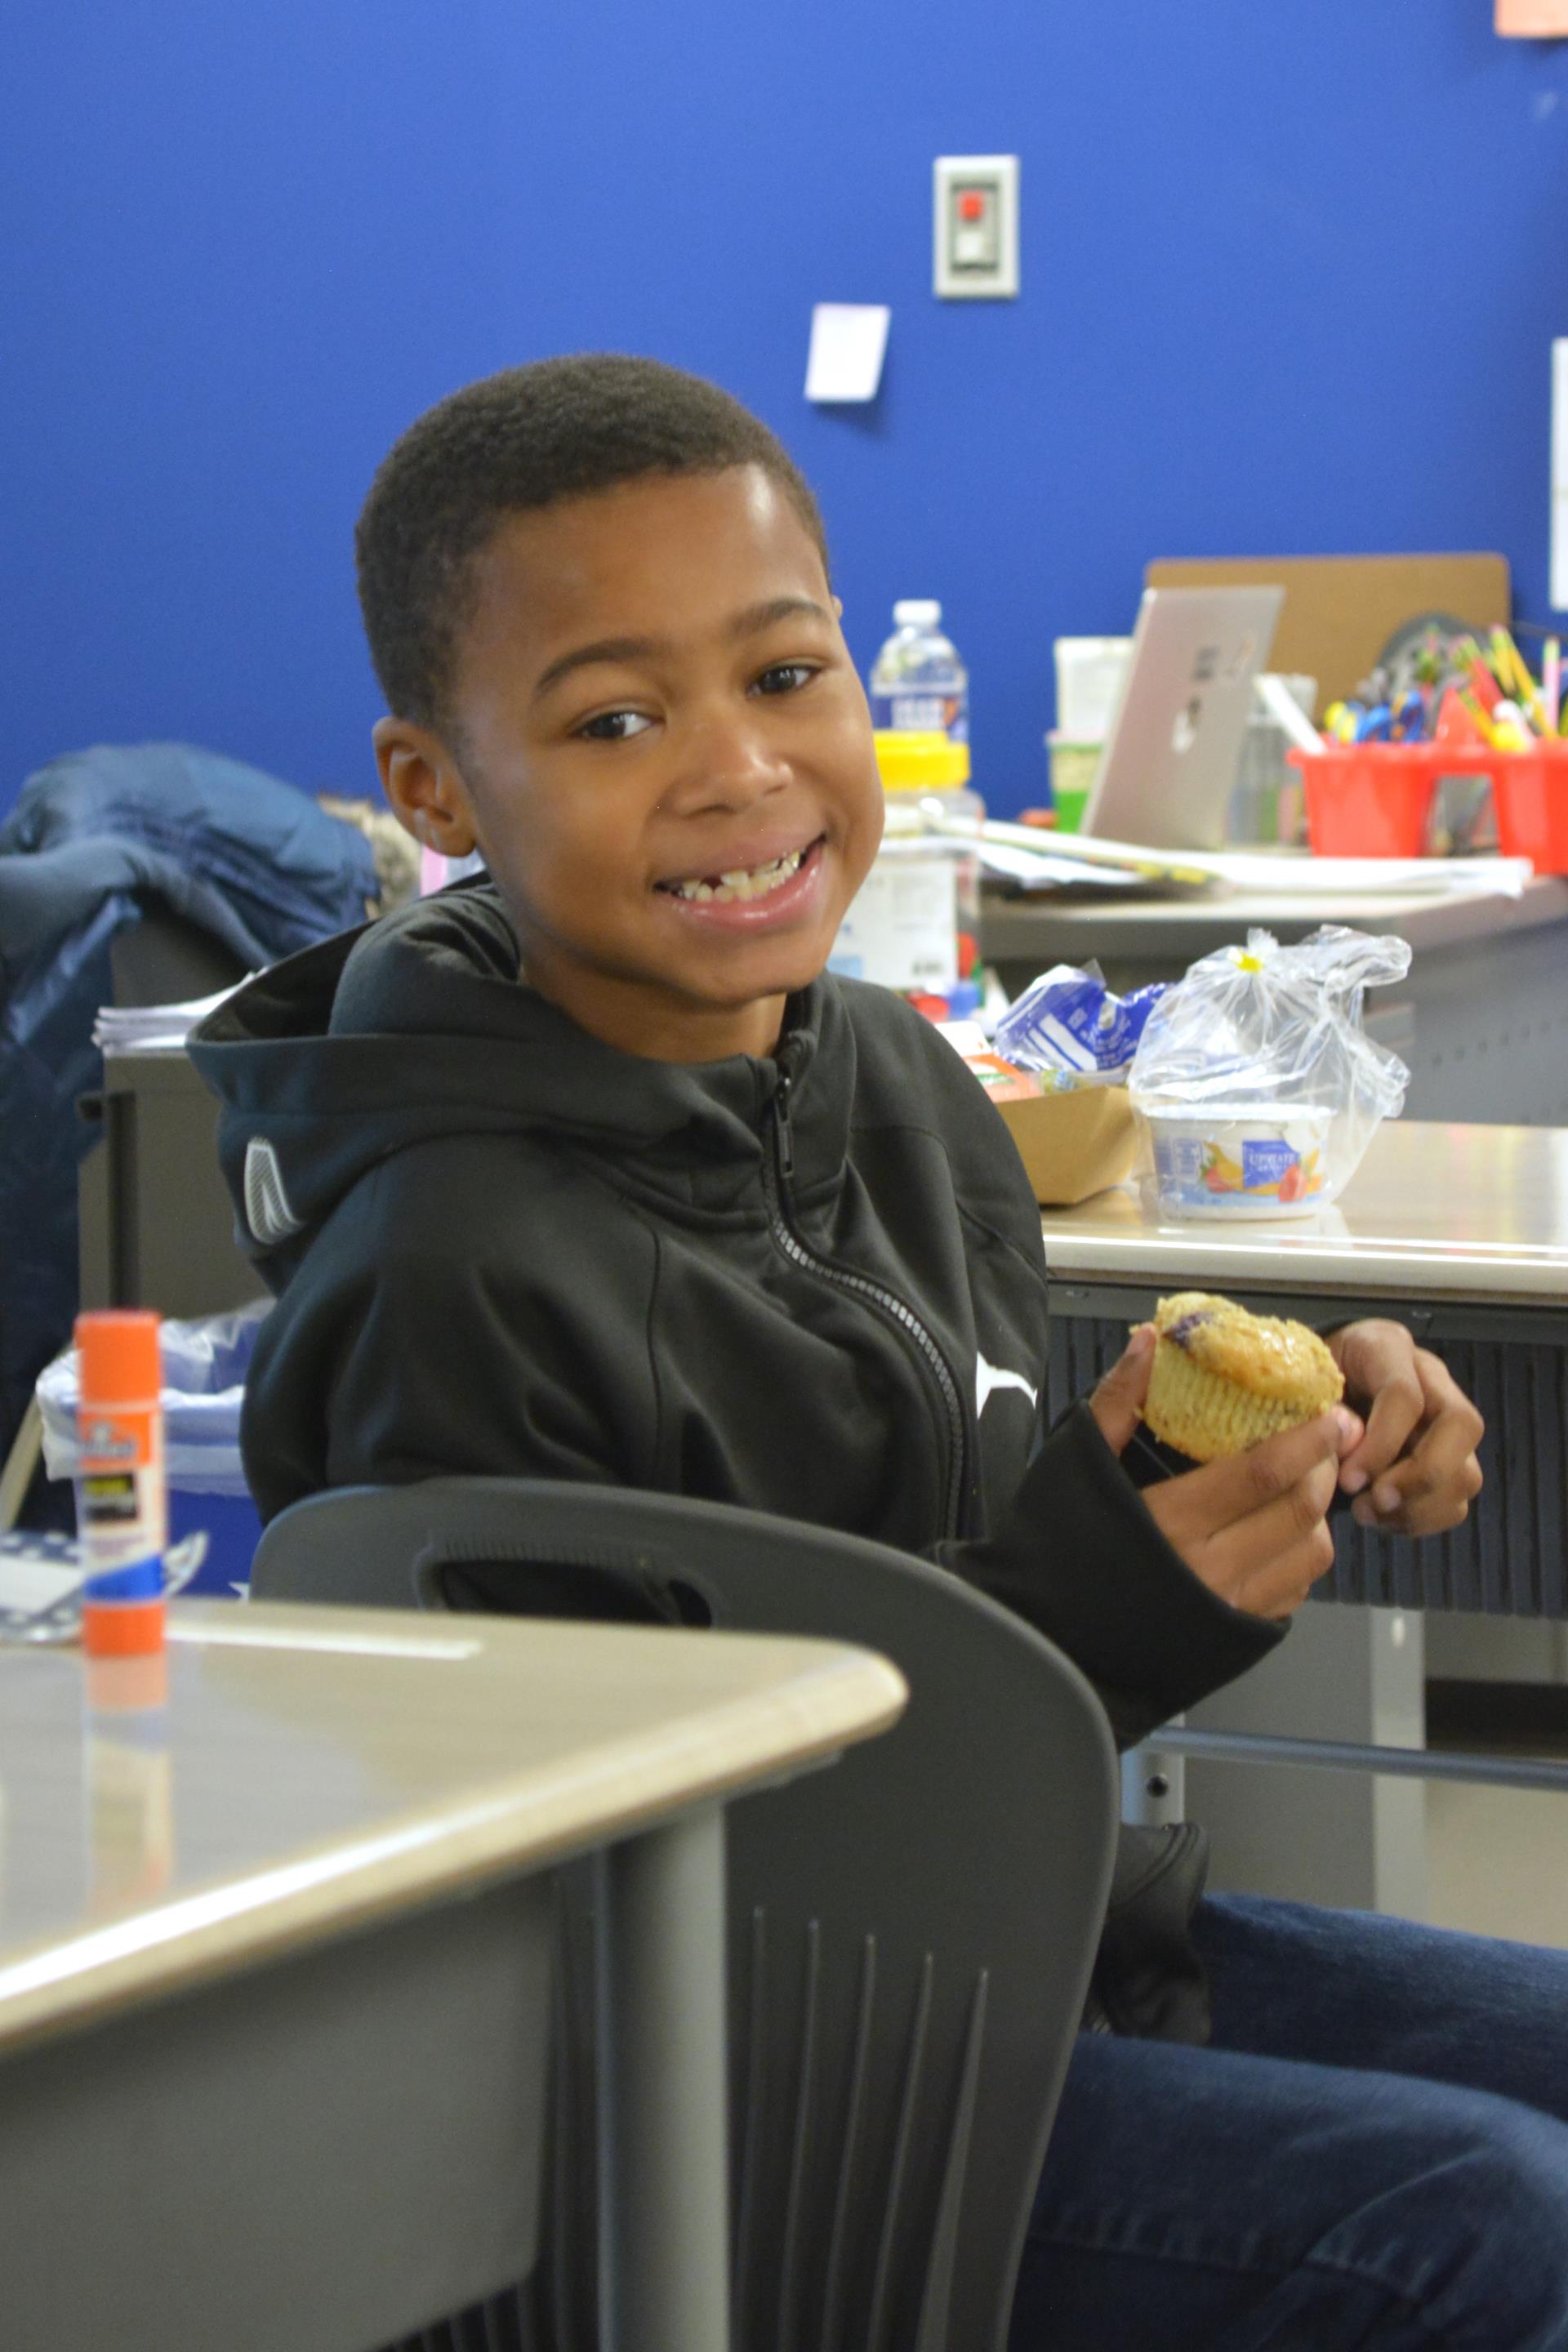 Student eating breakfast in the classroom